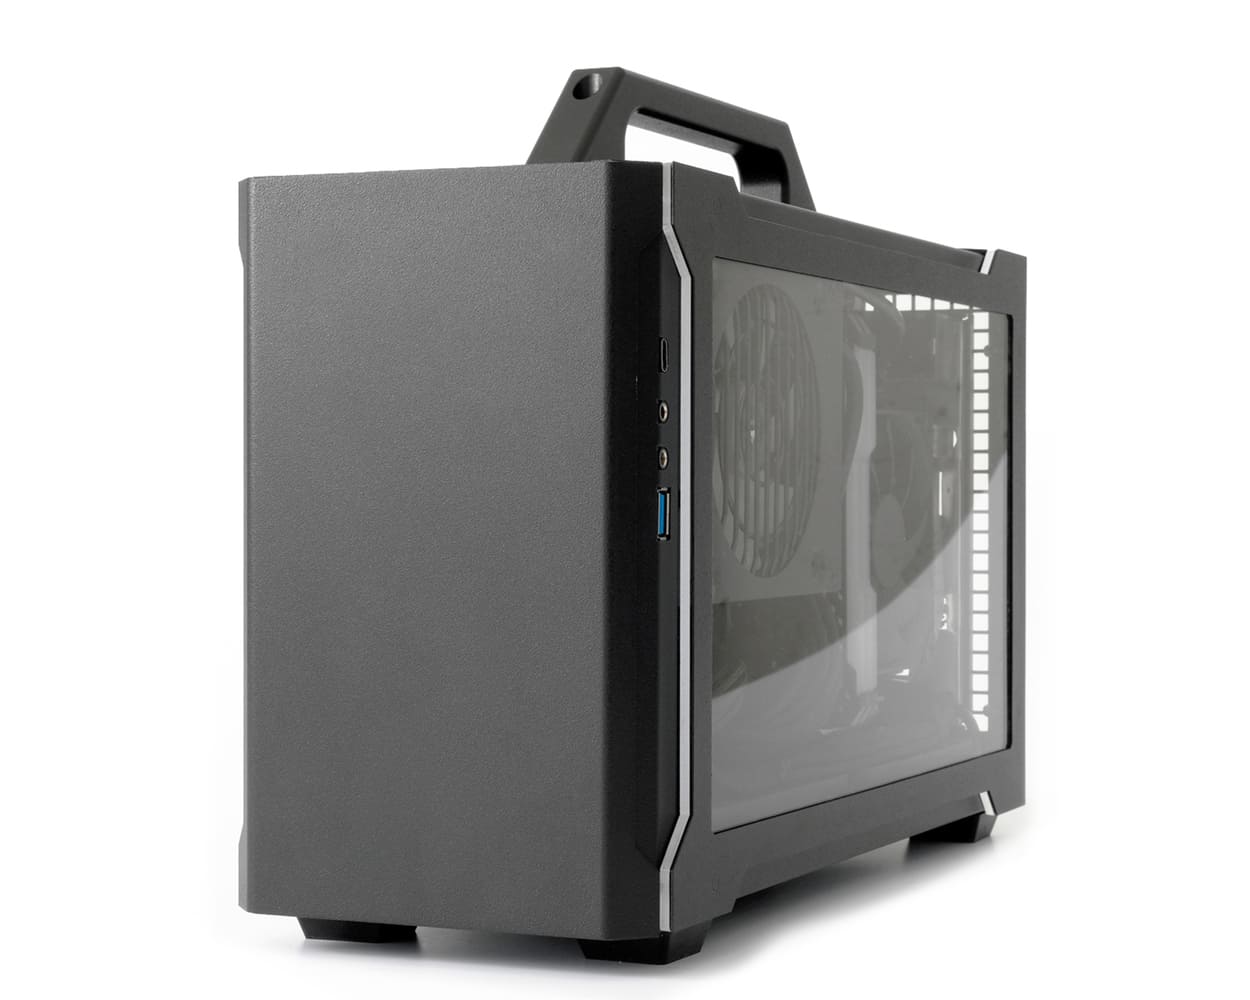 5 best selling Mini ITX PC with the same computer enclosure and